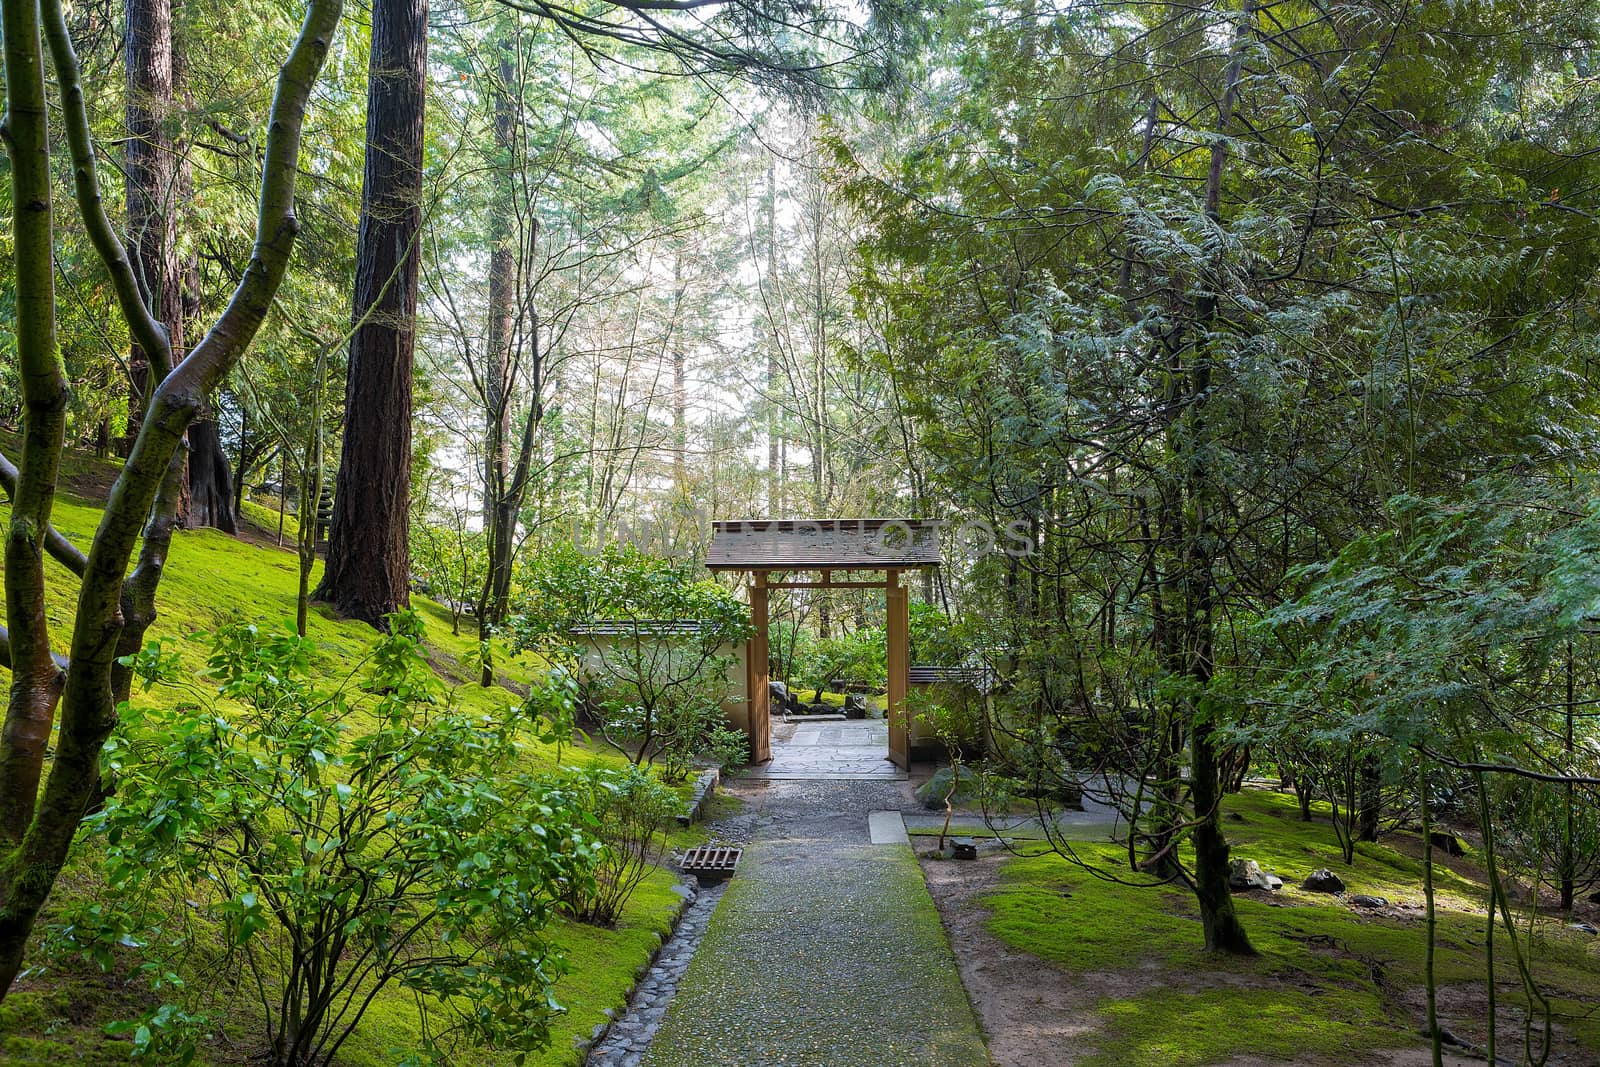 Japanese Garden Path leading to gate entrance amongst trees and plants in morning light